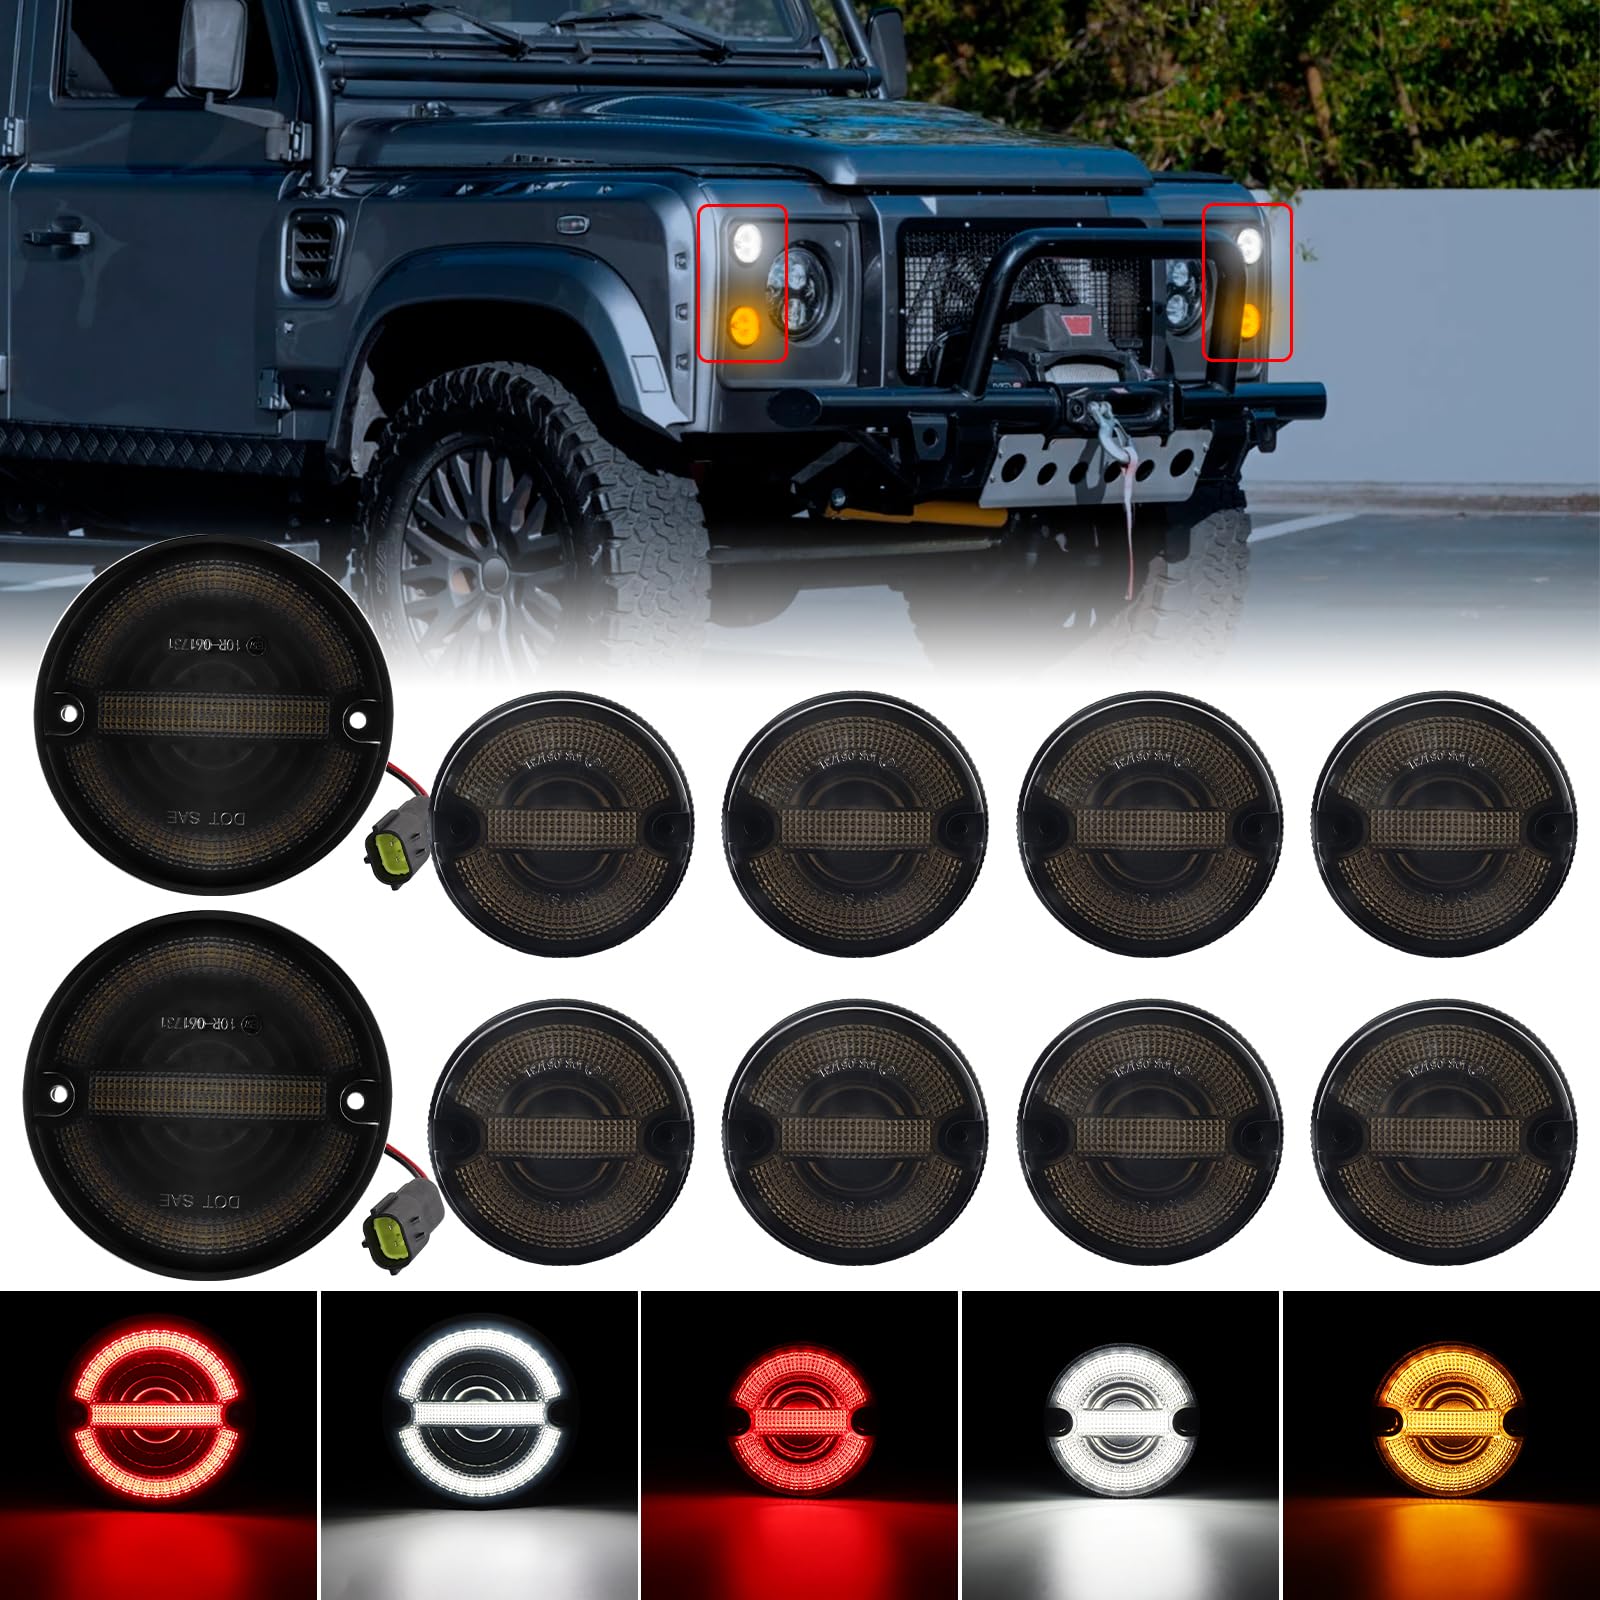 FetonAuto Defender Led Update Light Kits 10PCS with Plinth Retainer and Flasher, NAS Style Round Amber Indicatior Side Light Tail Fog Reverse Lights for Land Rover Defender 1990-2016, Smoked Lens von FetonAuto